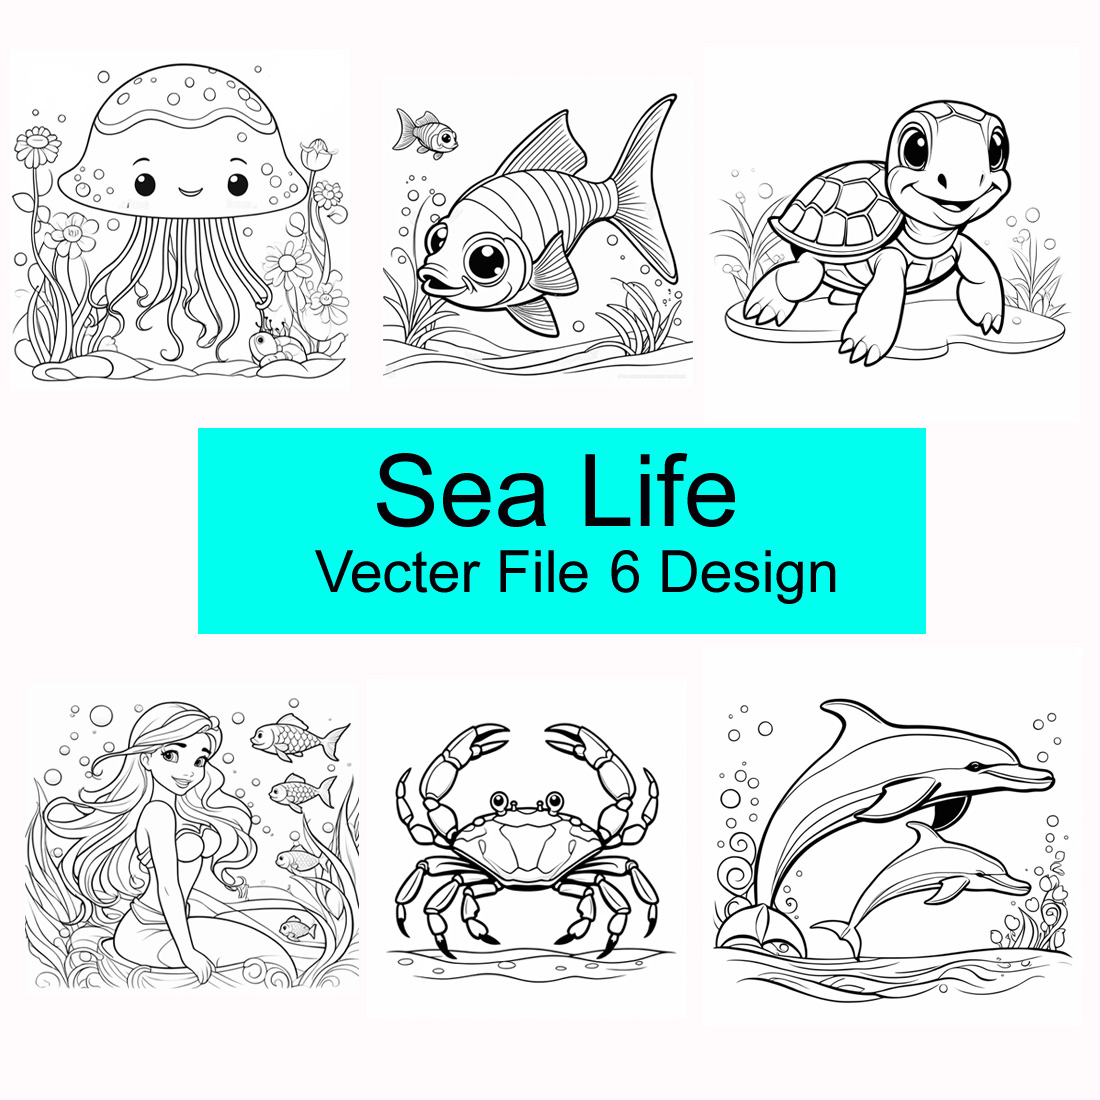 Sea life coloring page cover image.